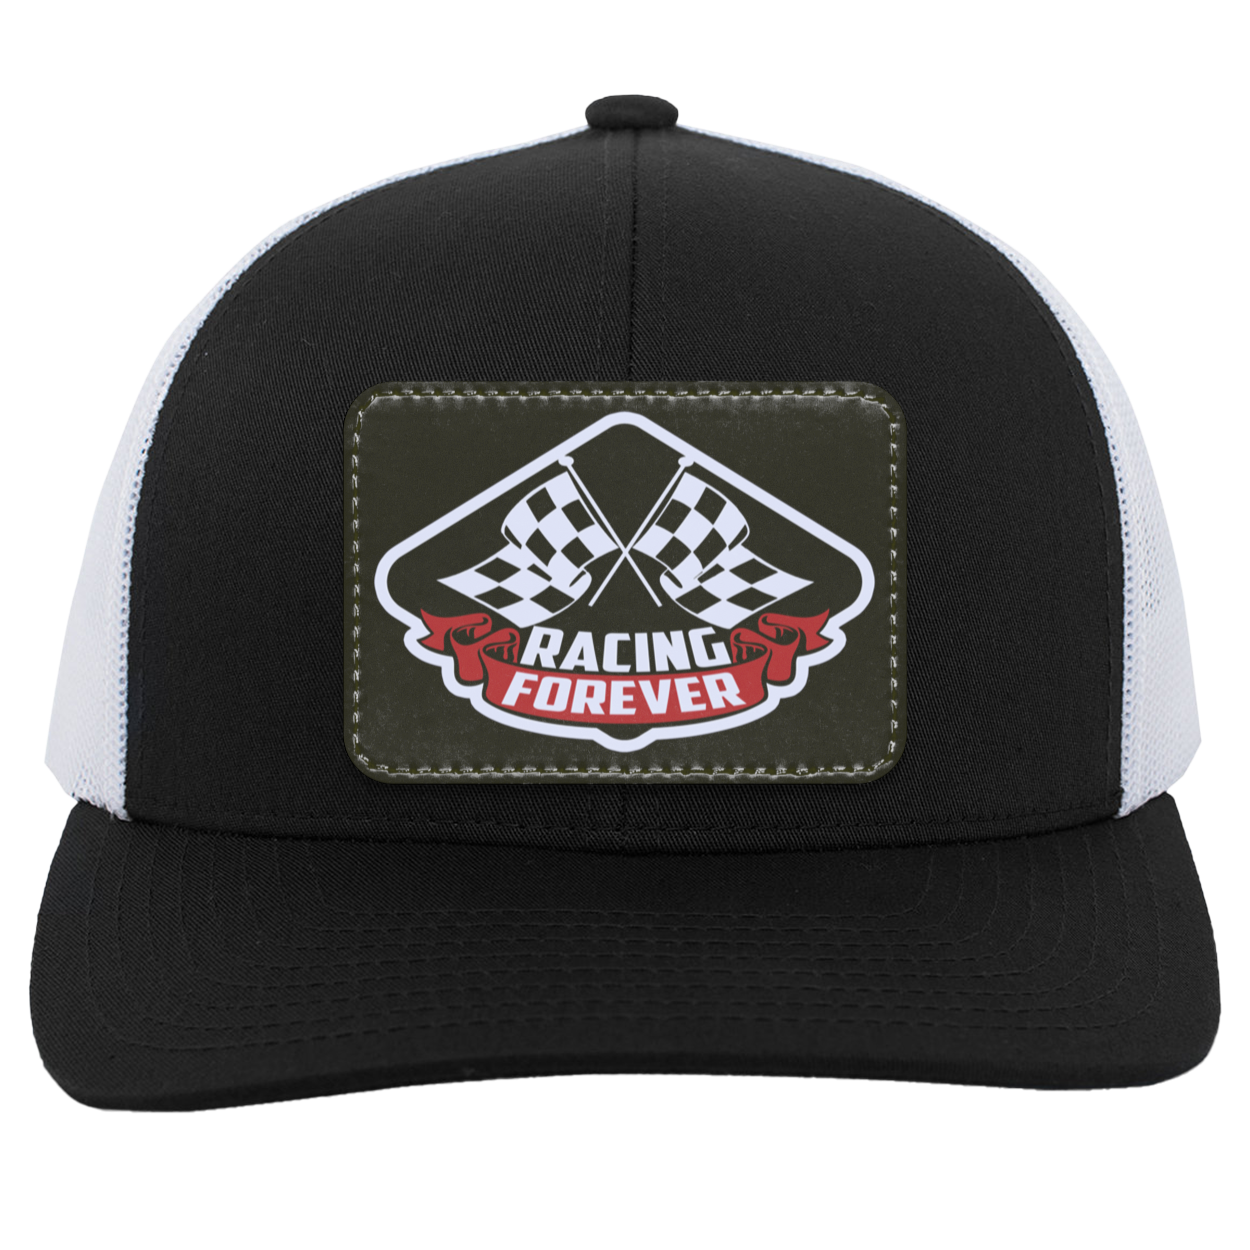 Racing Forever Trucker Patched Snap Back